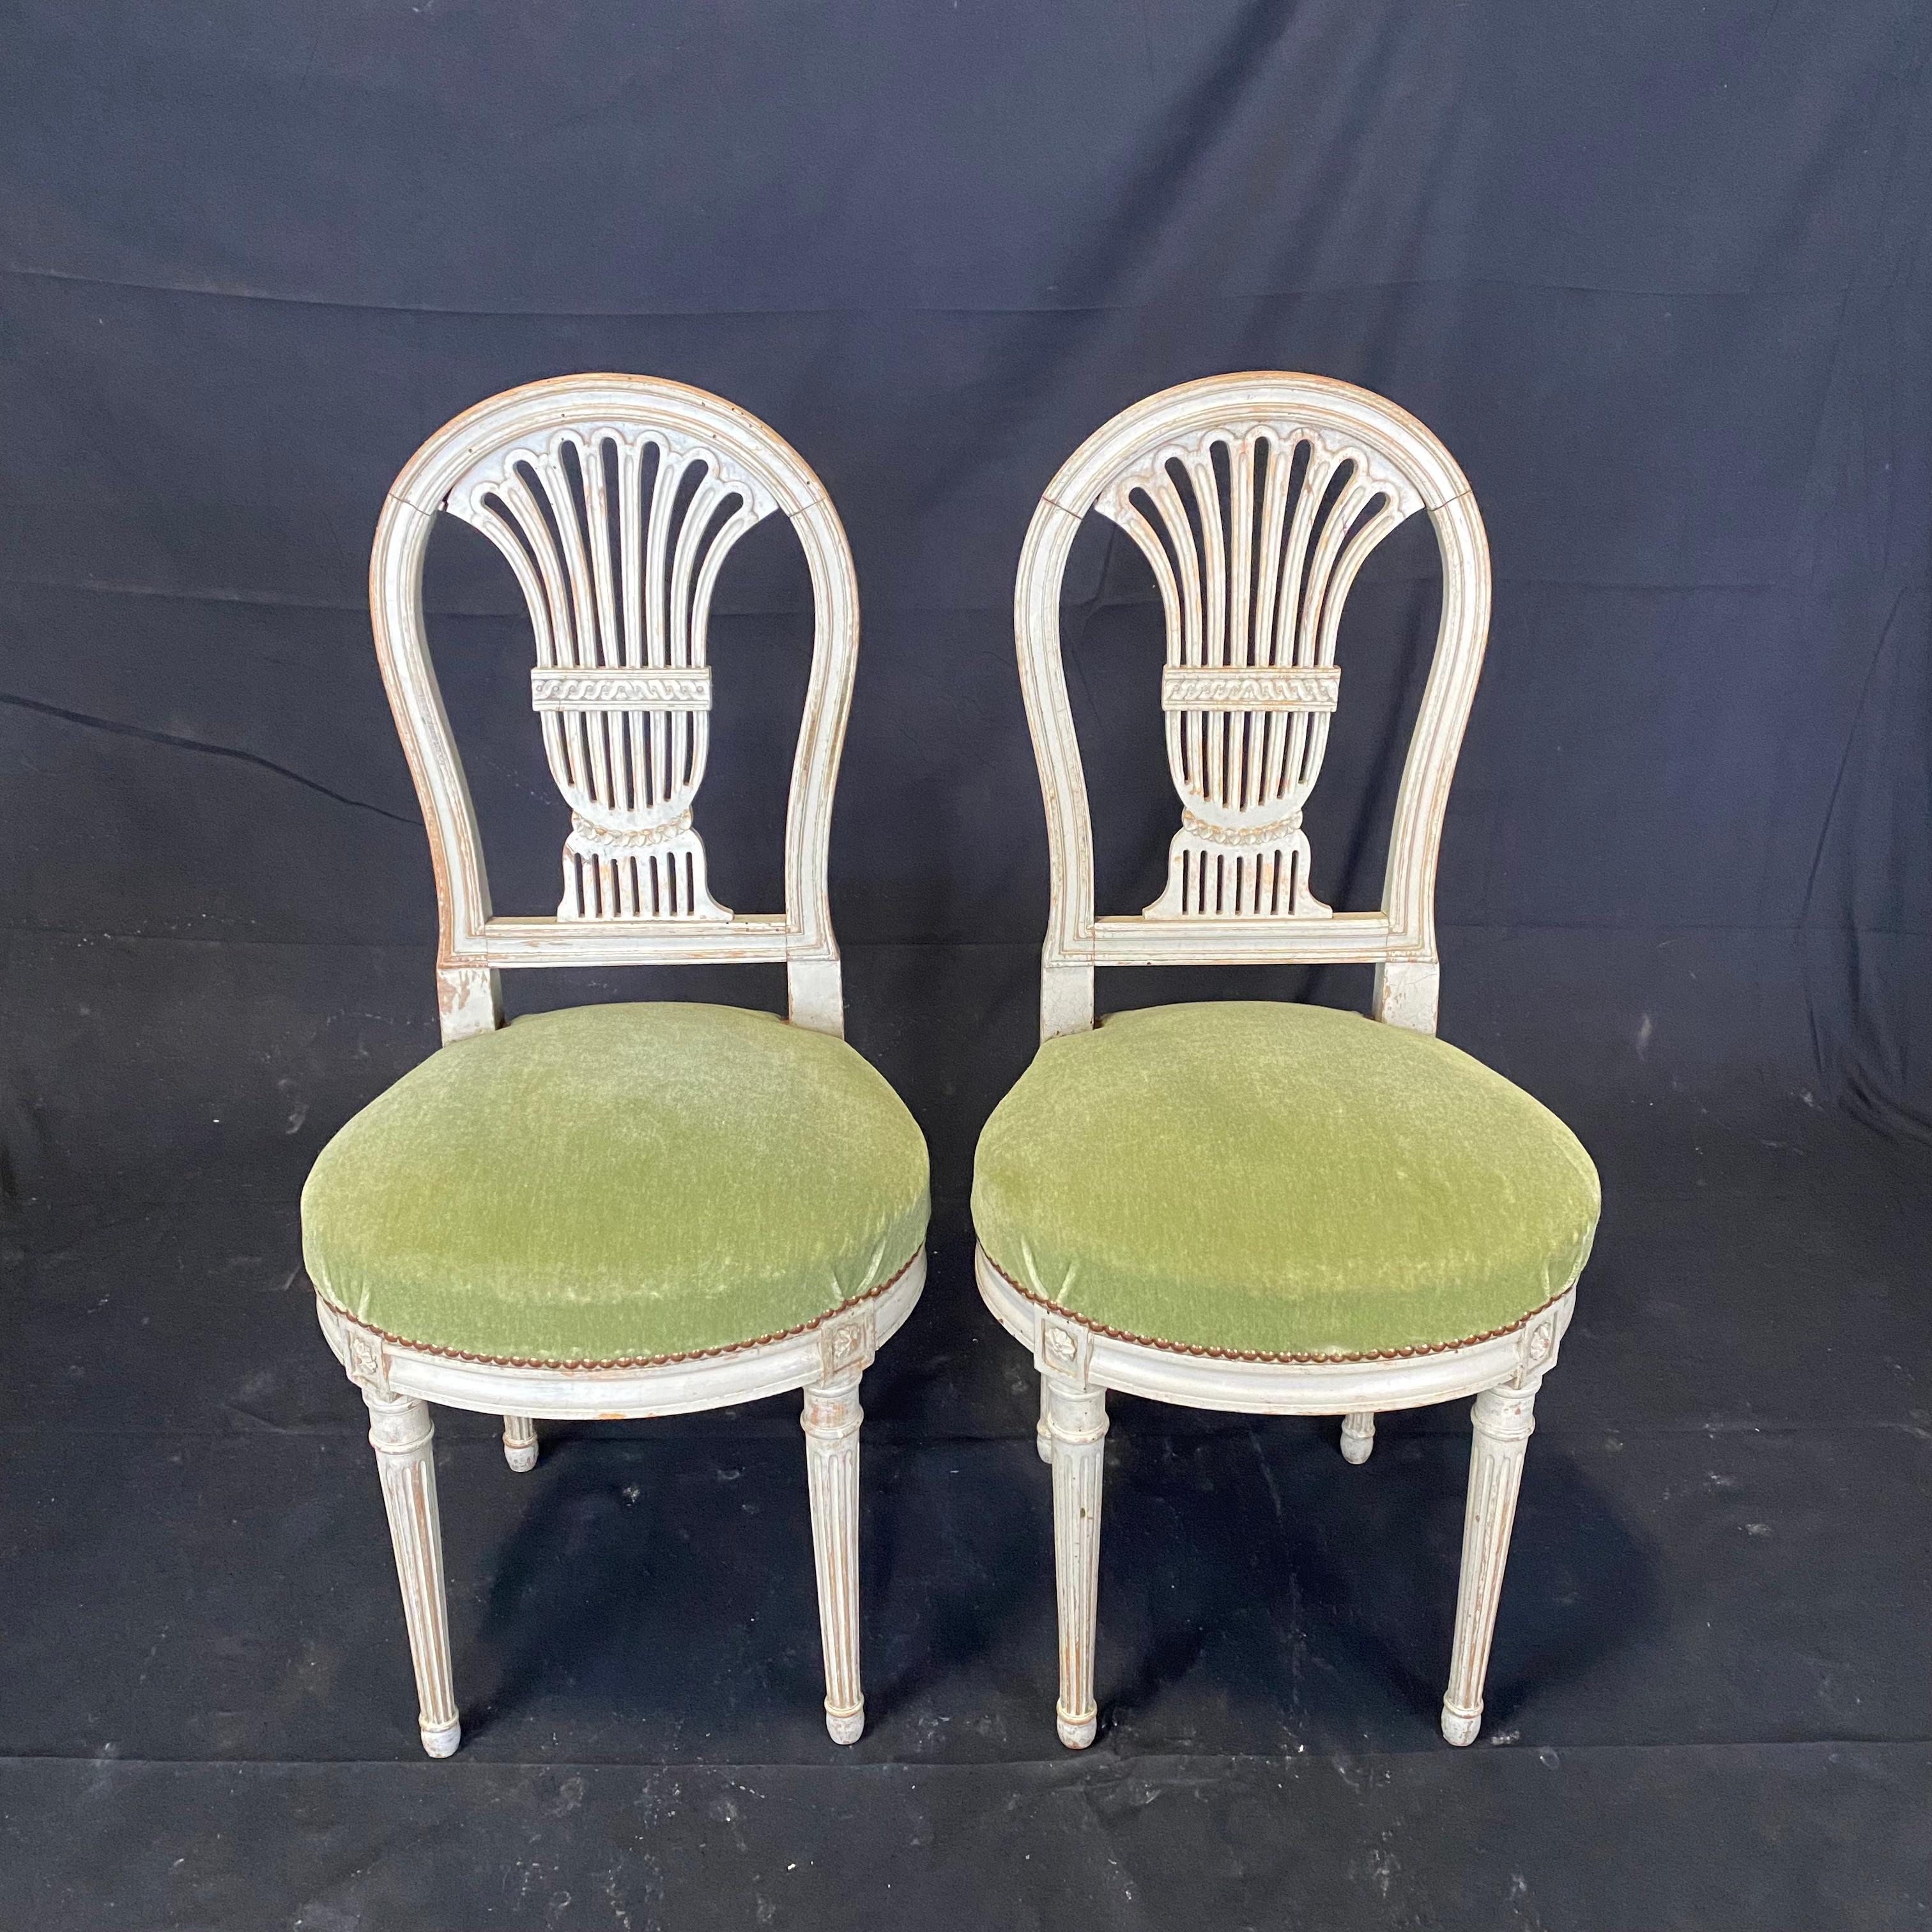 Really lovely pair of antique French Louis XVI dining room chairs with harp or balloon shaped ornament in the back, the legs decorated with fluting and rosettes, and the wood with original ivory paint. Fabulous green mohair upholstery. #6153.